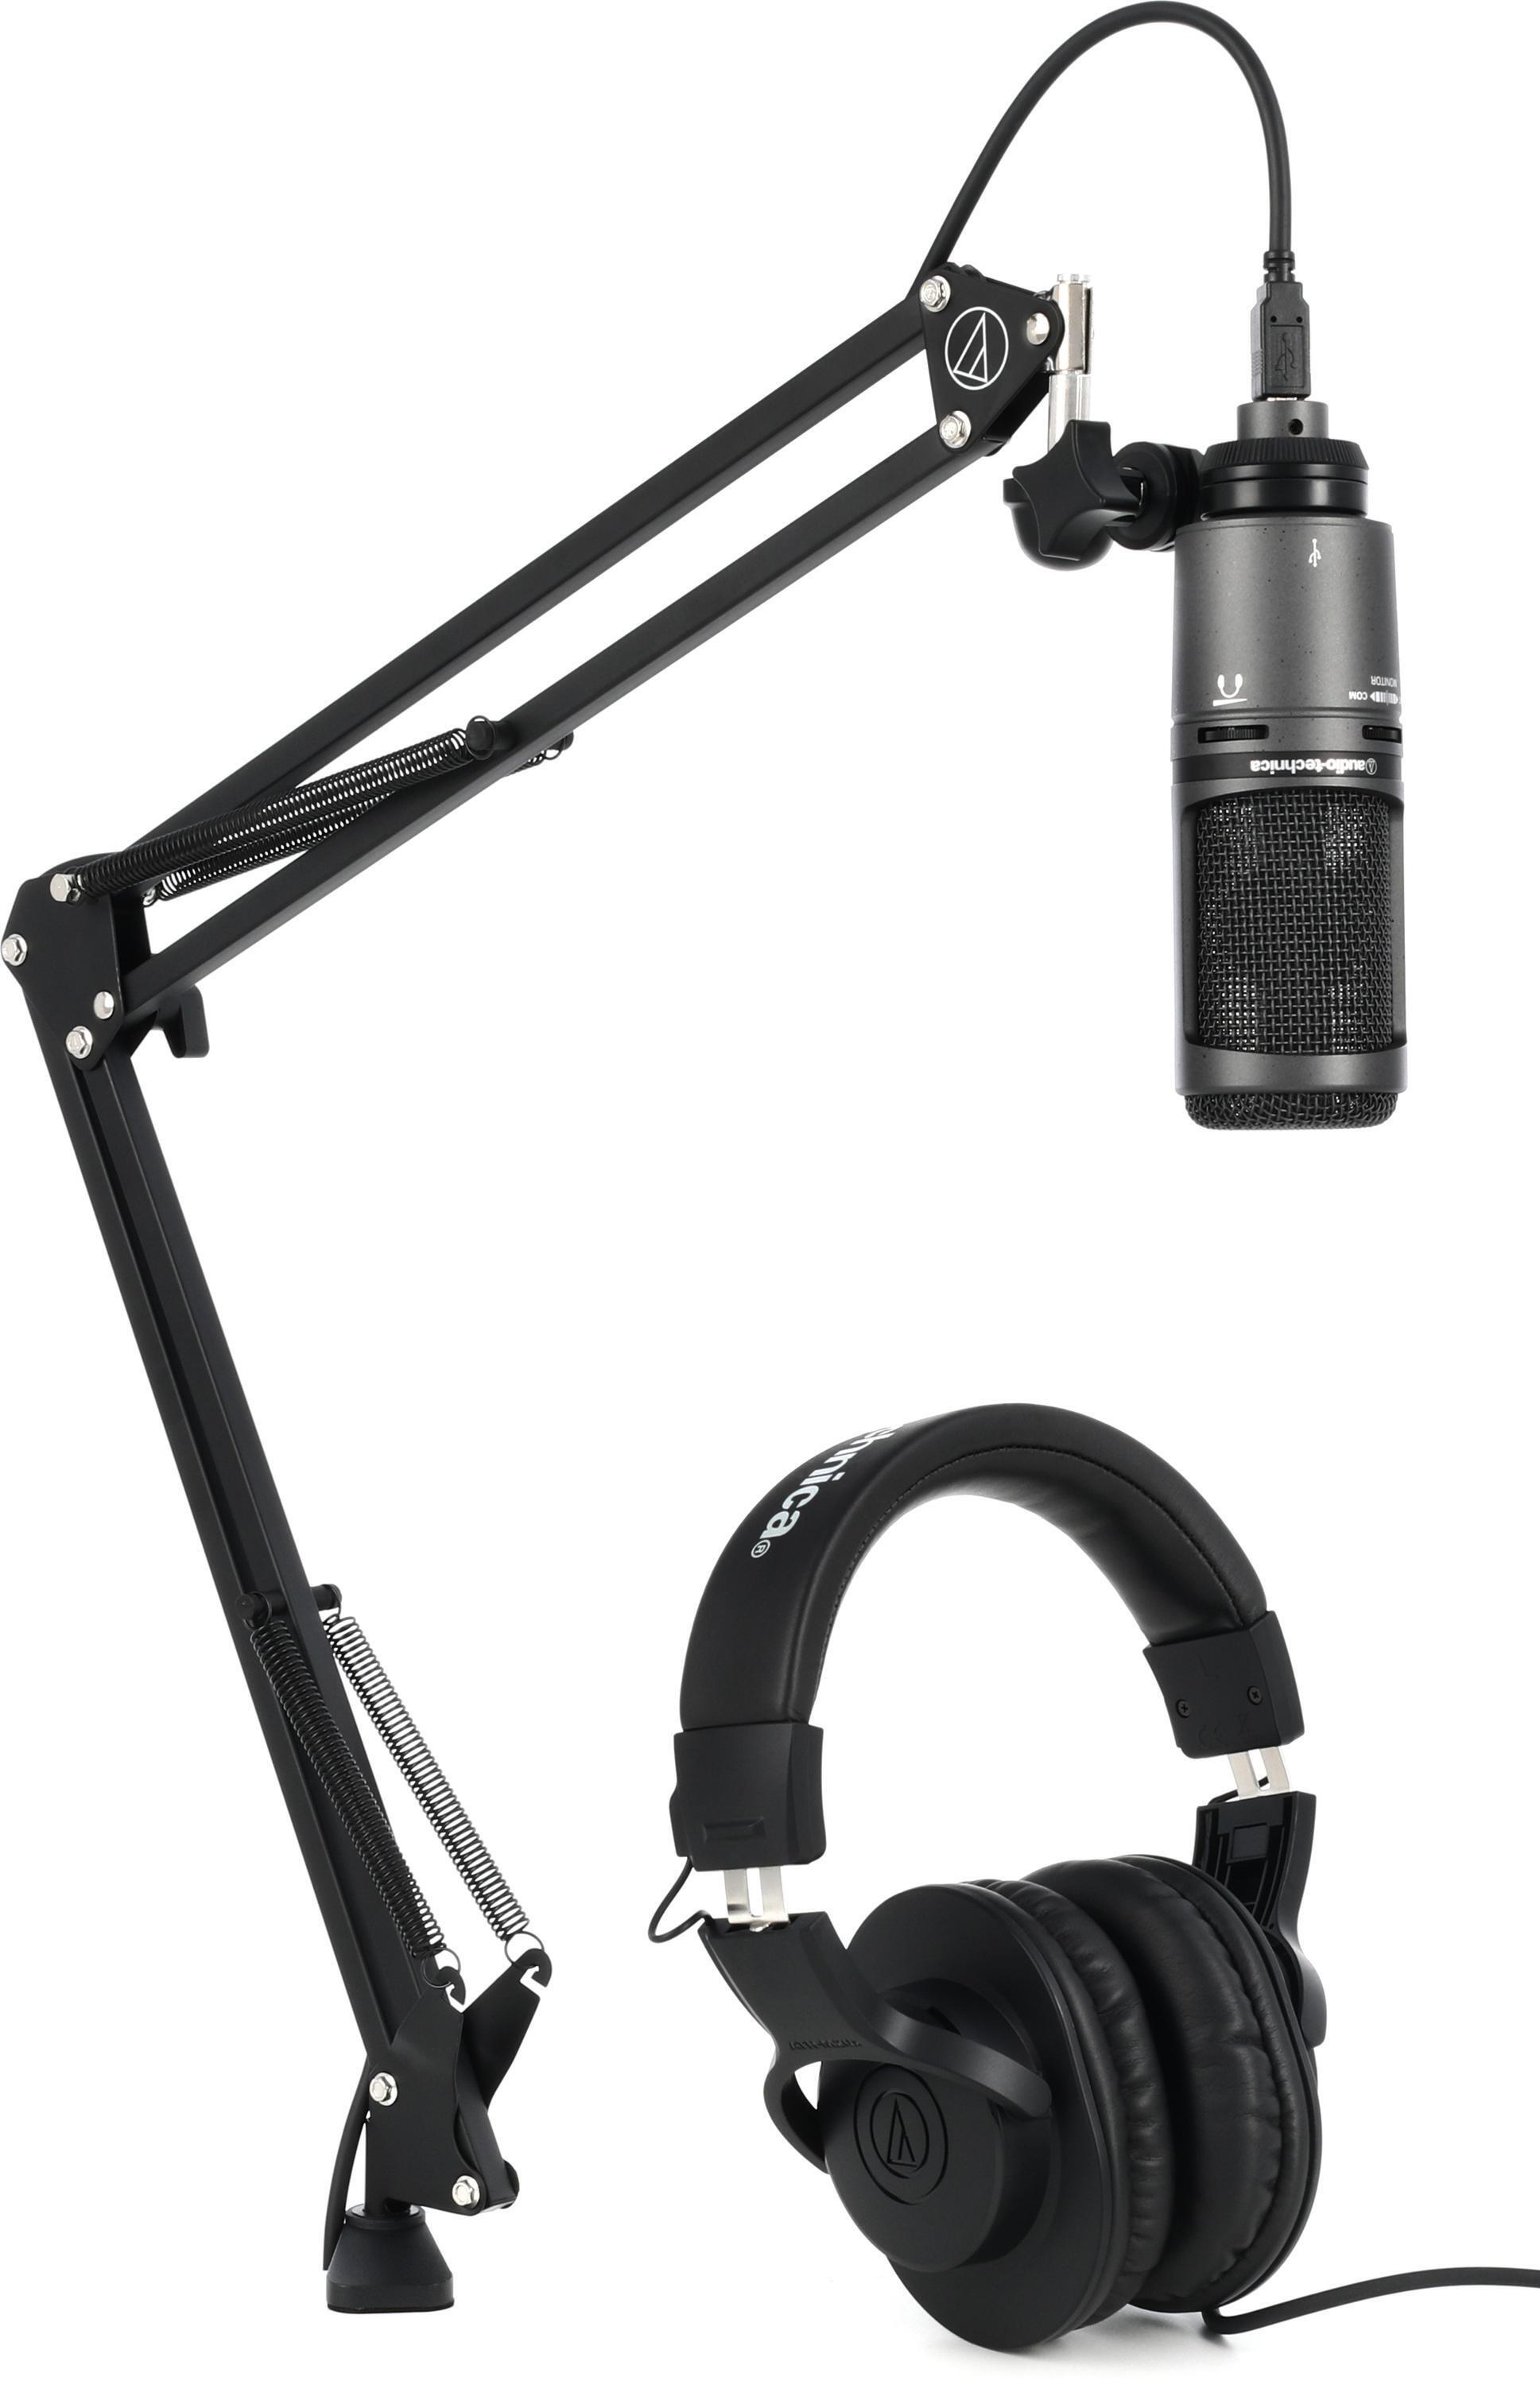 Audio-Technica AT2020USB+PK Streaming/Podcasting Pack | Sweetwater